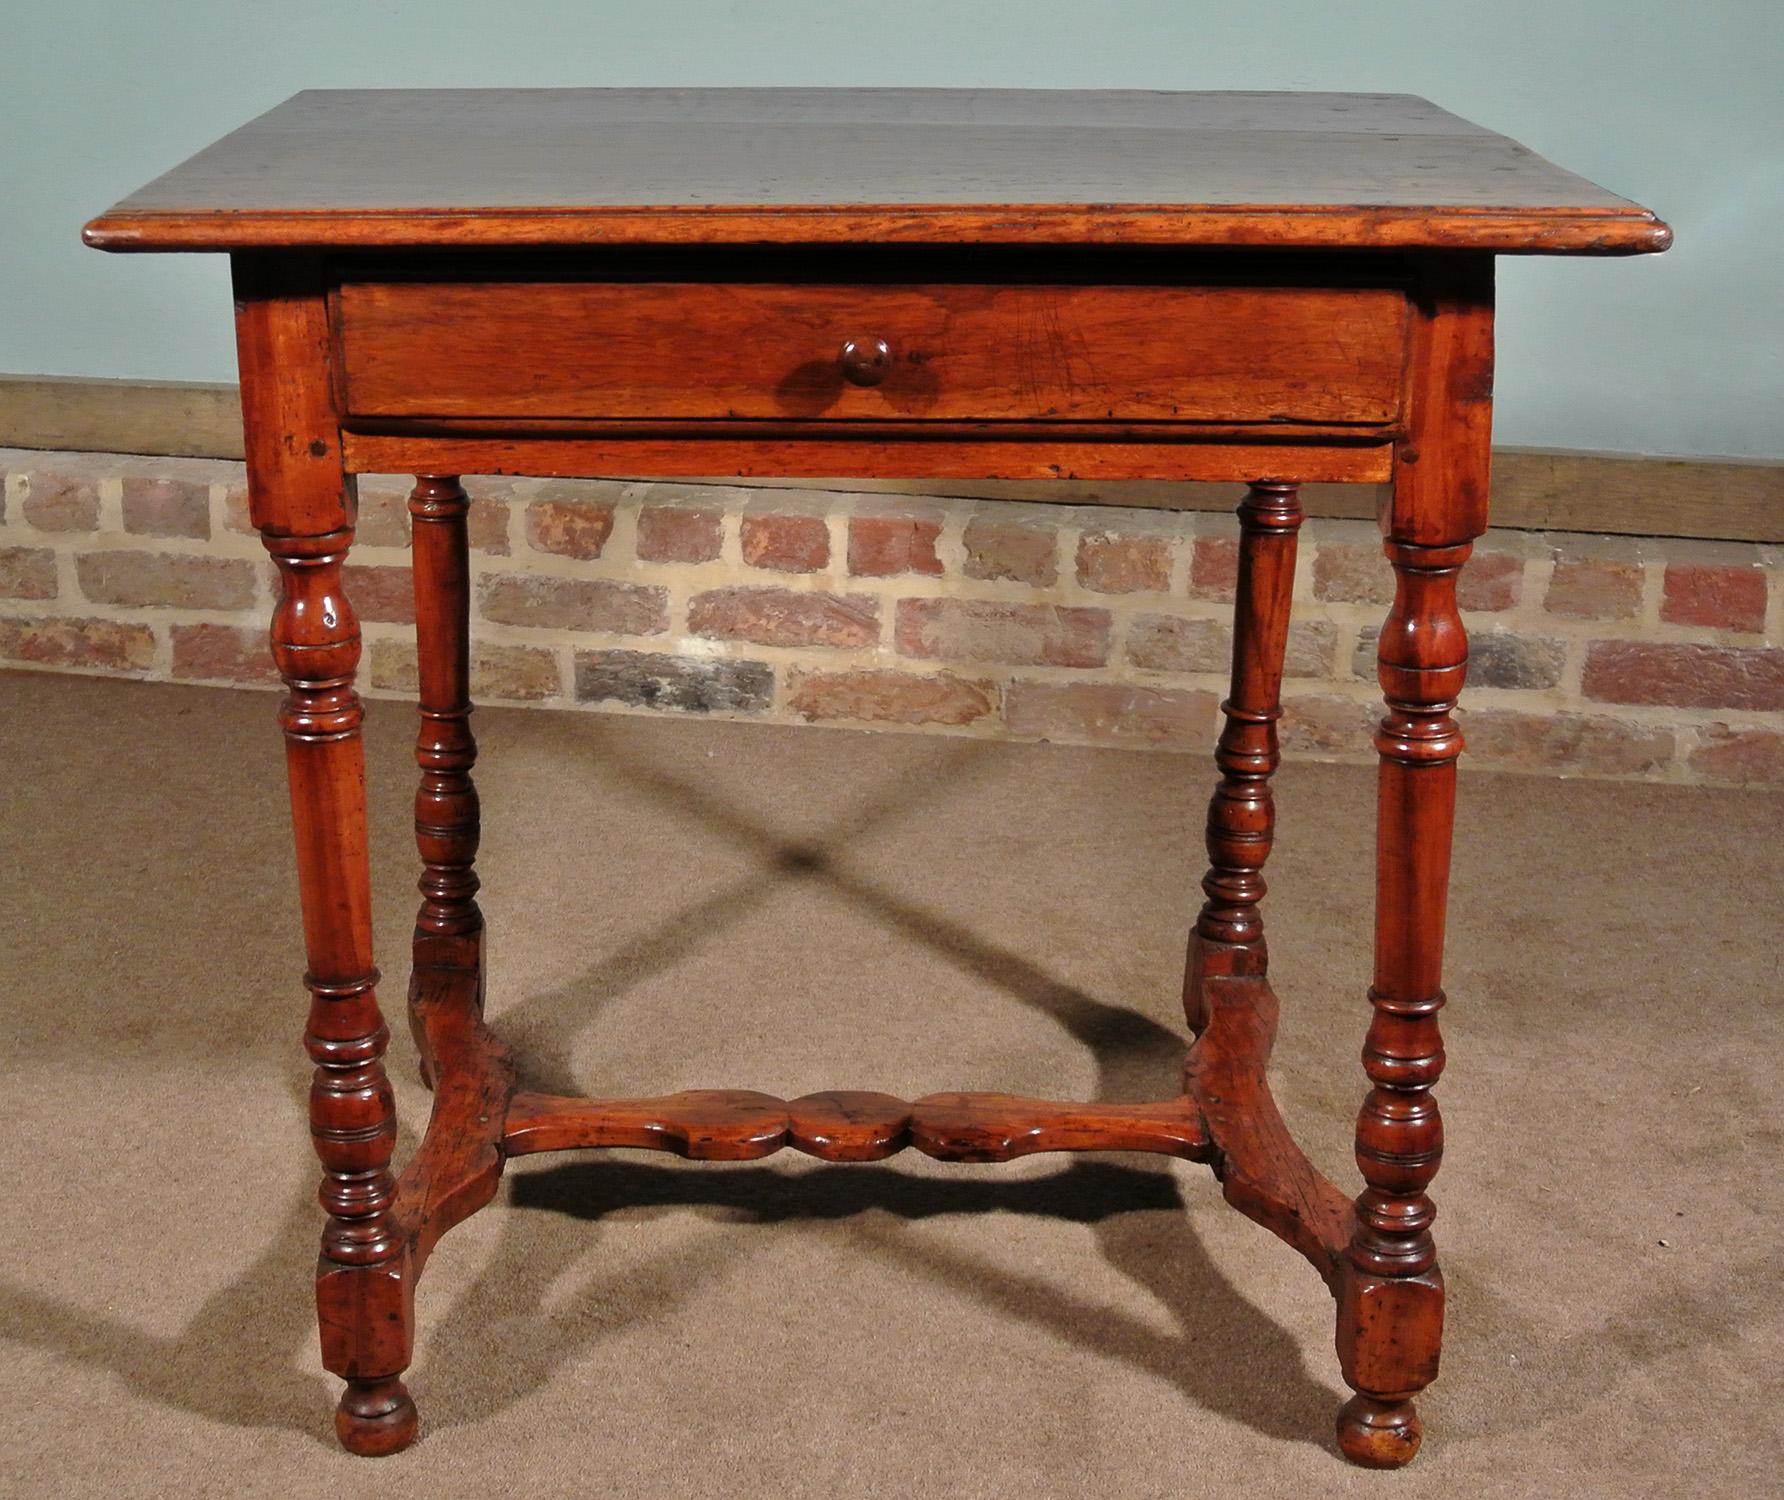 With a superb color, a late 17th century walnut tavern table in very good original condition. 

The over-sailing top made from a single thick plank of walnut with stepped and bullnosed border to all four sides. The stepped and bullnosed detail